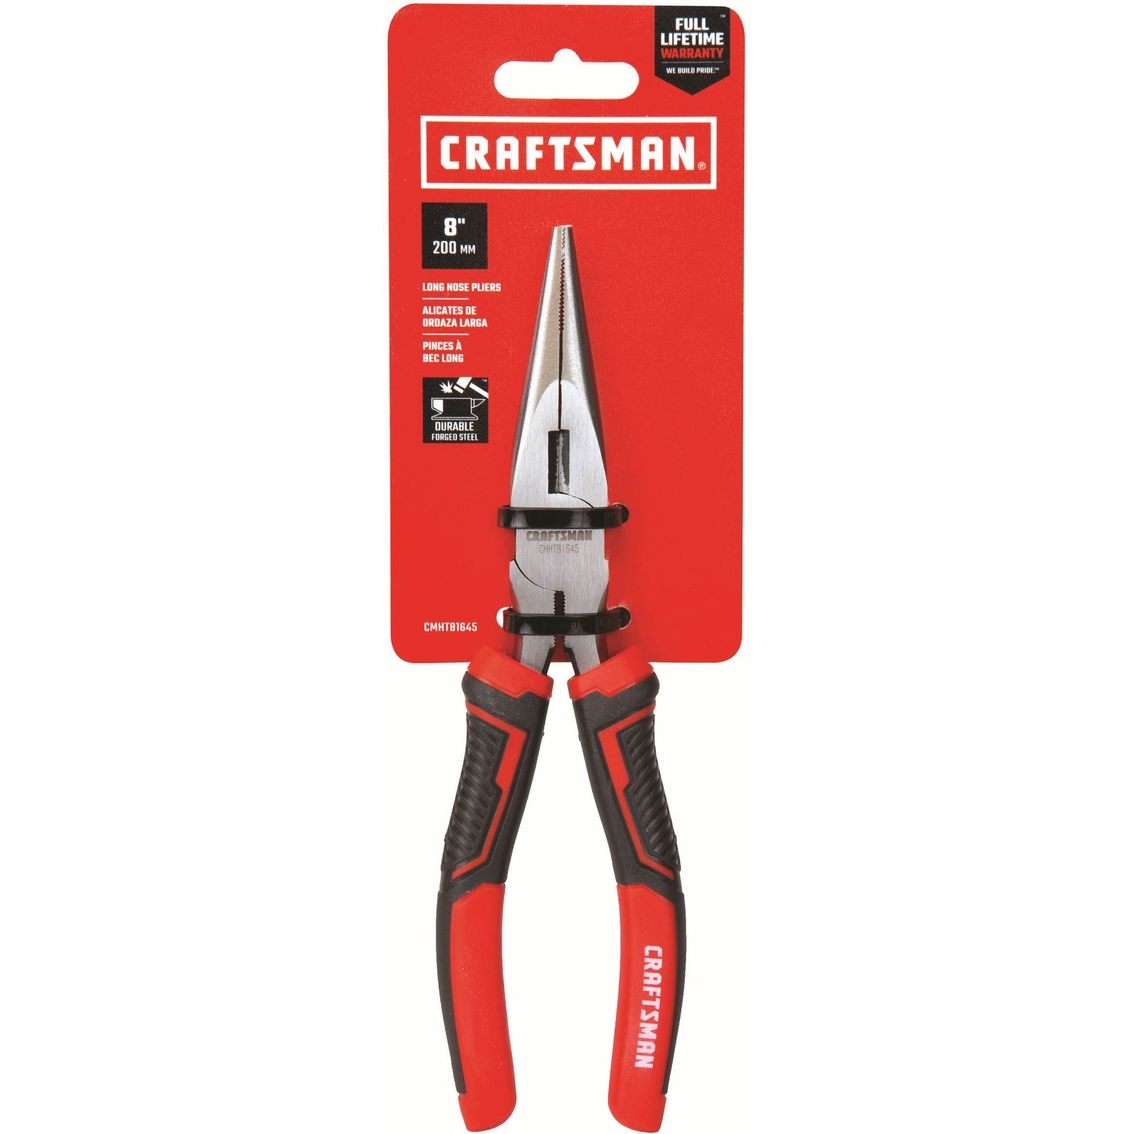 CRAFTSMAN 8-in Electrical Long Nose Pliers with Wire Cutter - Image 3 of 3